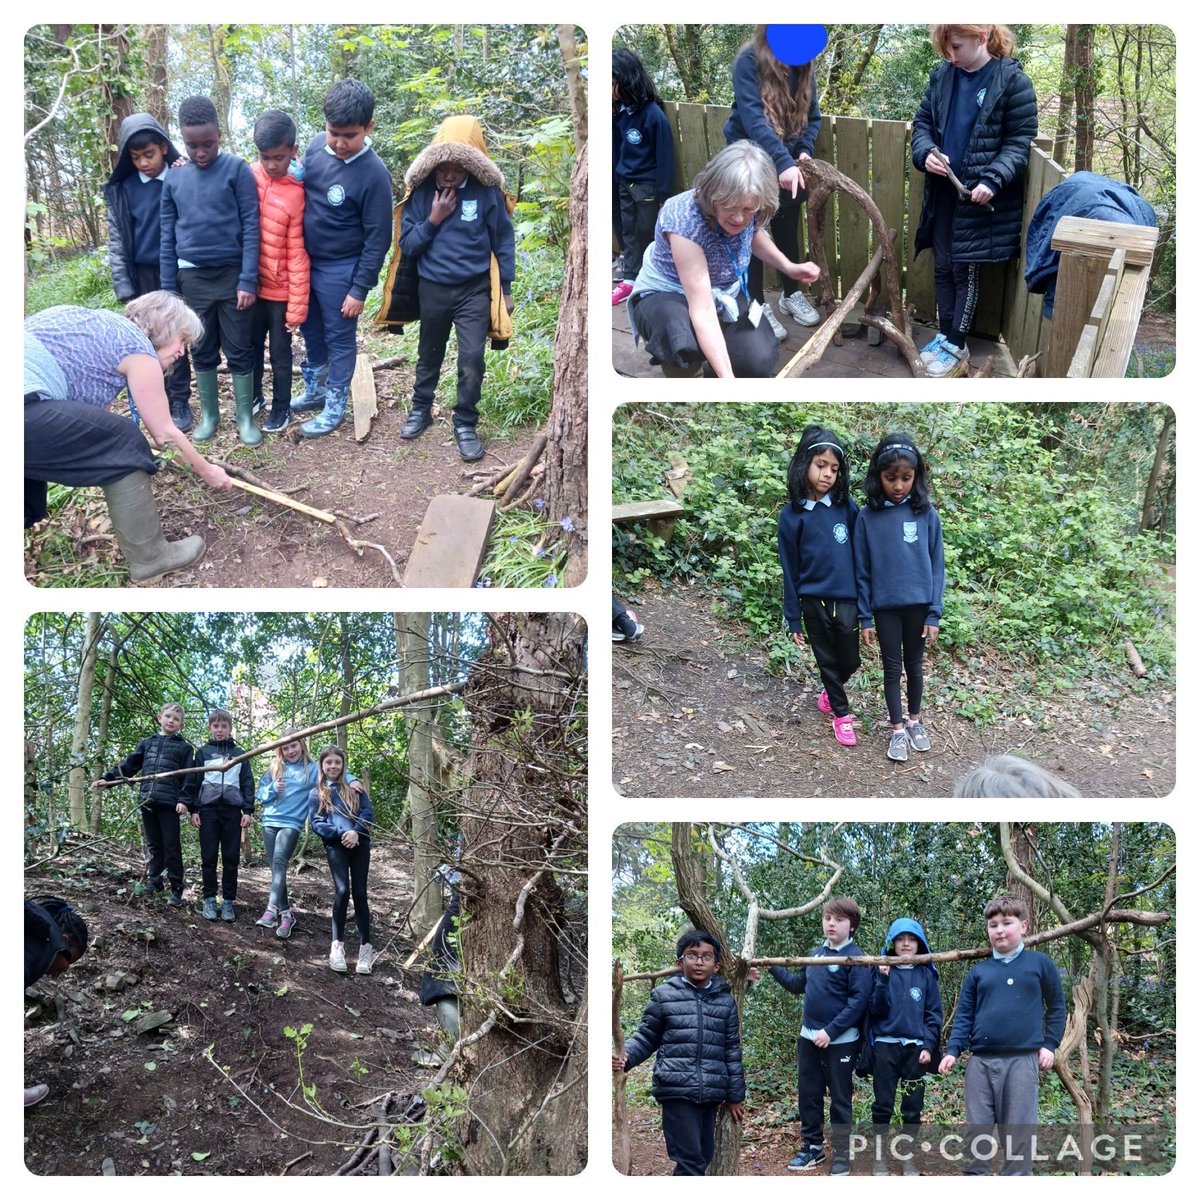 Having read the tale of Branwen in the Mabinogi, Dosbarth Ystwyth built bridges using natural materials to represent Bendigeidfran stretching across the river. We measured the length to see who had the longest bridge #ambitiousandcapable #outdoorlearningweek